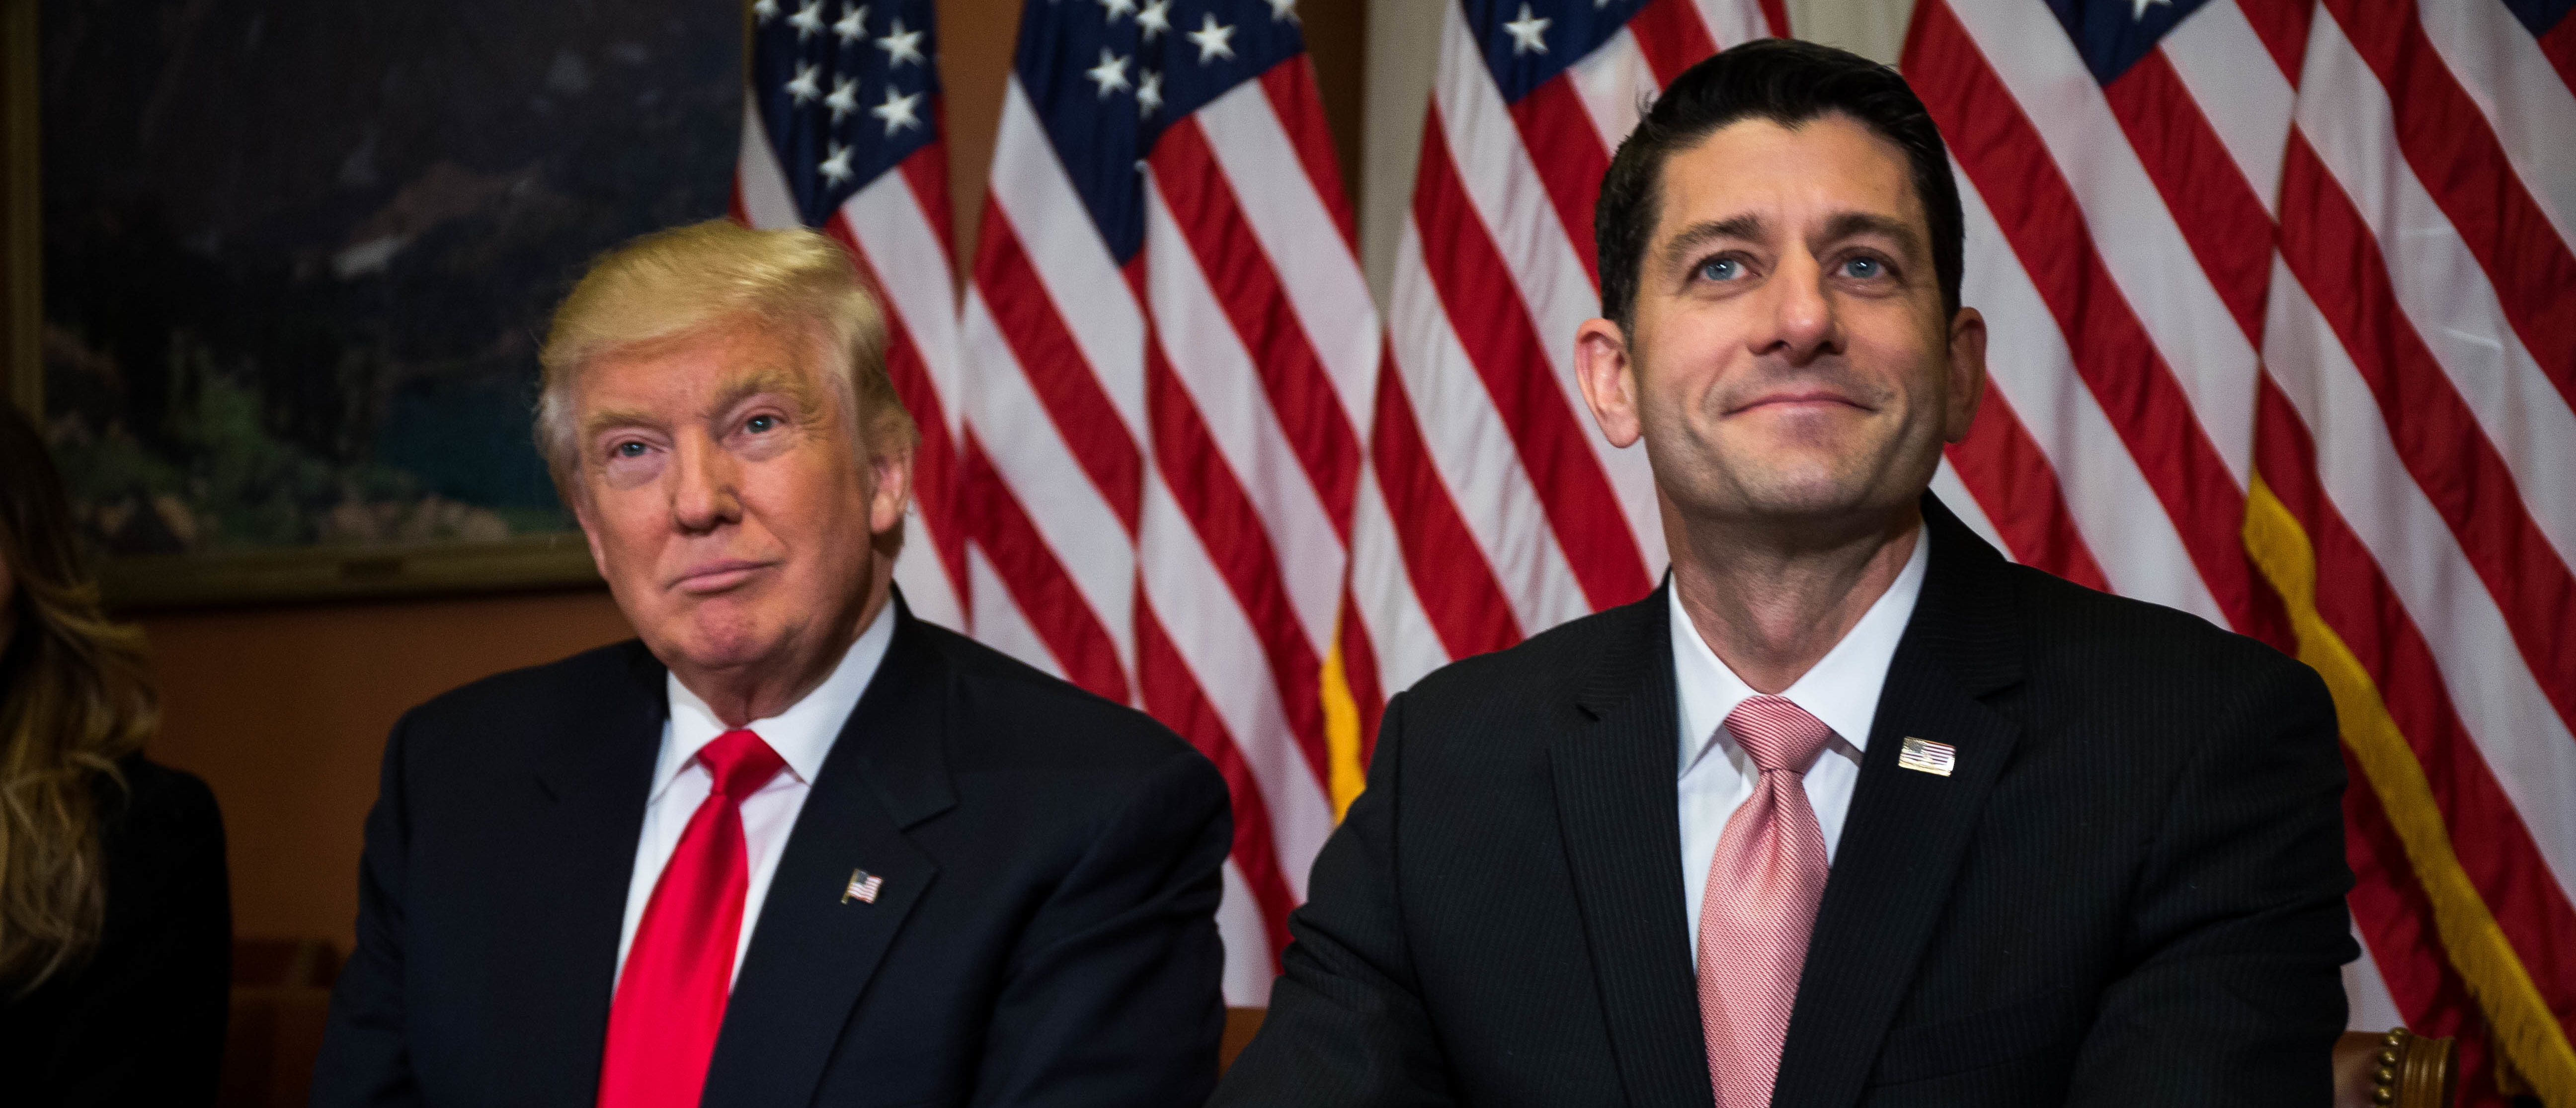 WASHINGTON, D.C. - NOVEMBER 10: President-elect Donald Trump meets with House Speaker Paul Ryan (R-WI) at the U.S. Capitol for a meeting November 10, 2016 in Washington, DC. Earlier in the day president-elect Trump met with U.S. President Barack Obama at the White House. (Photo by Zach Gibson/Getty Images)